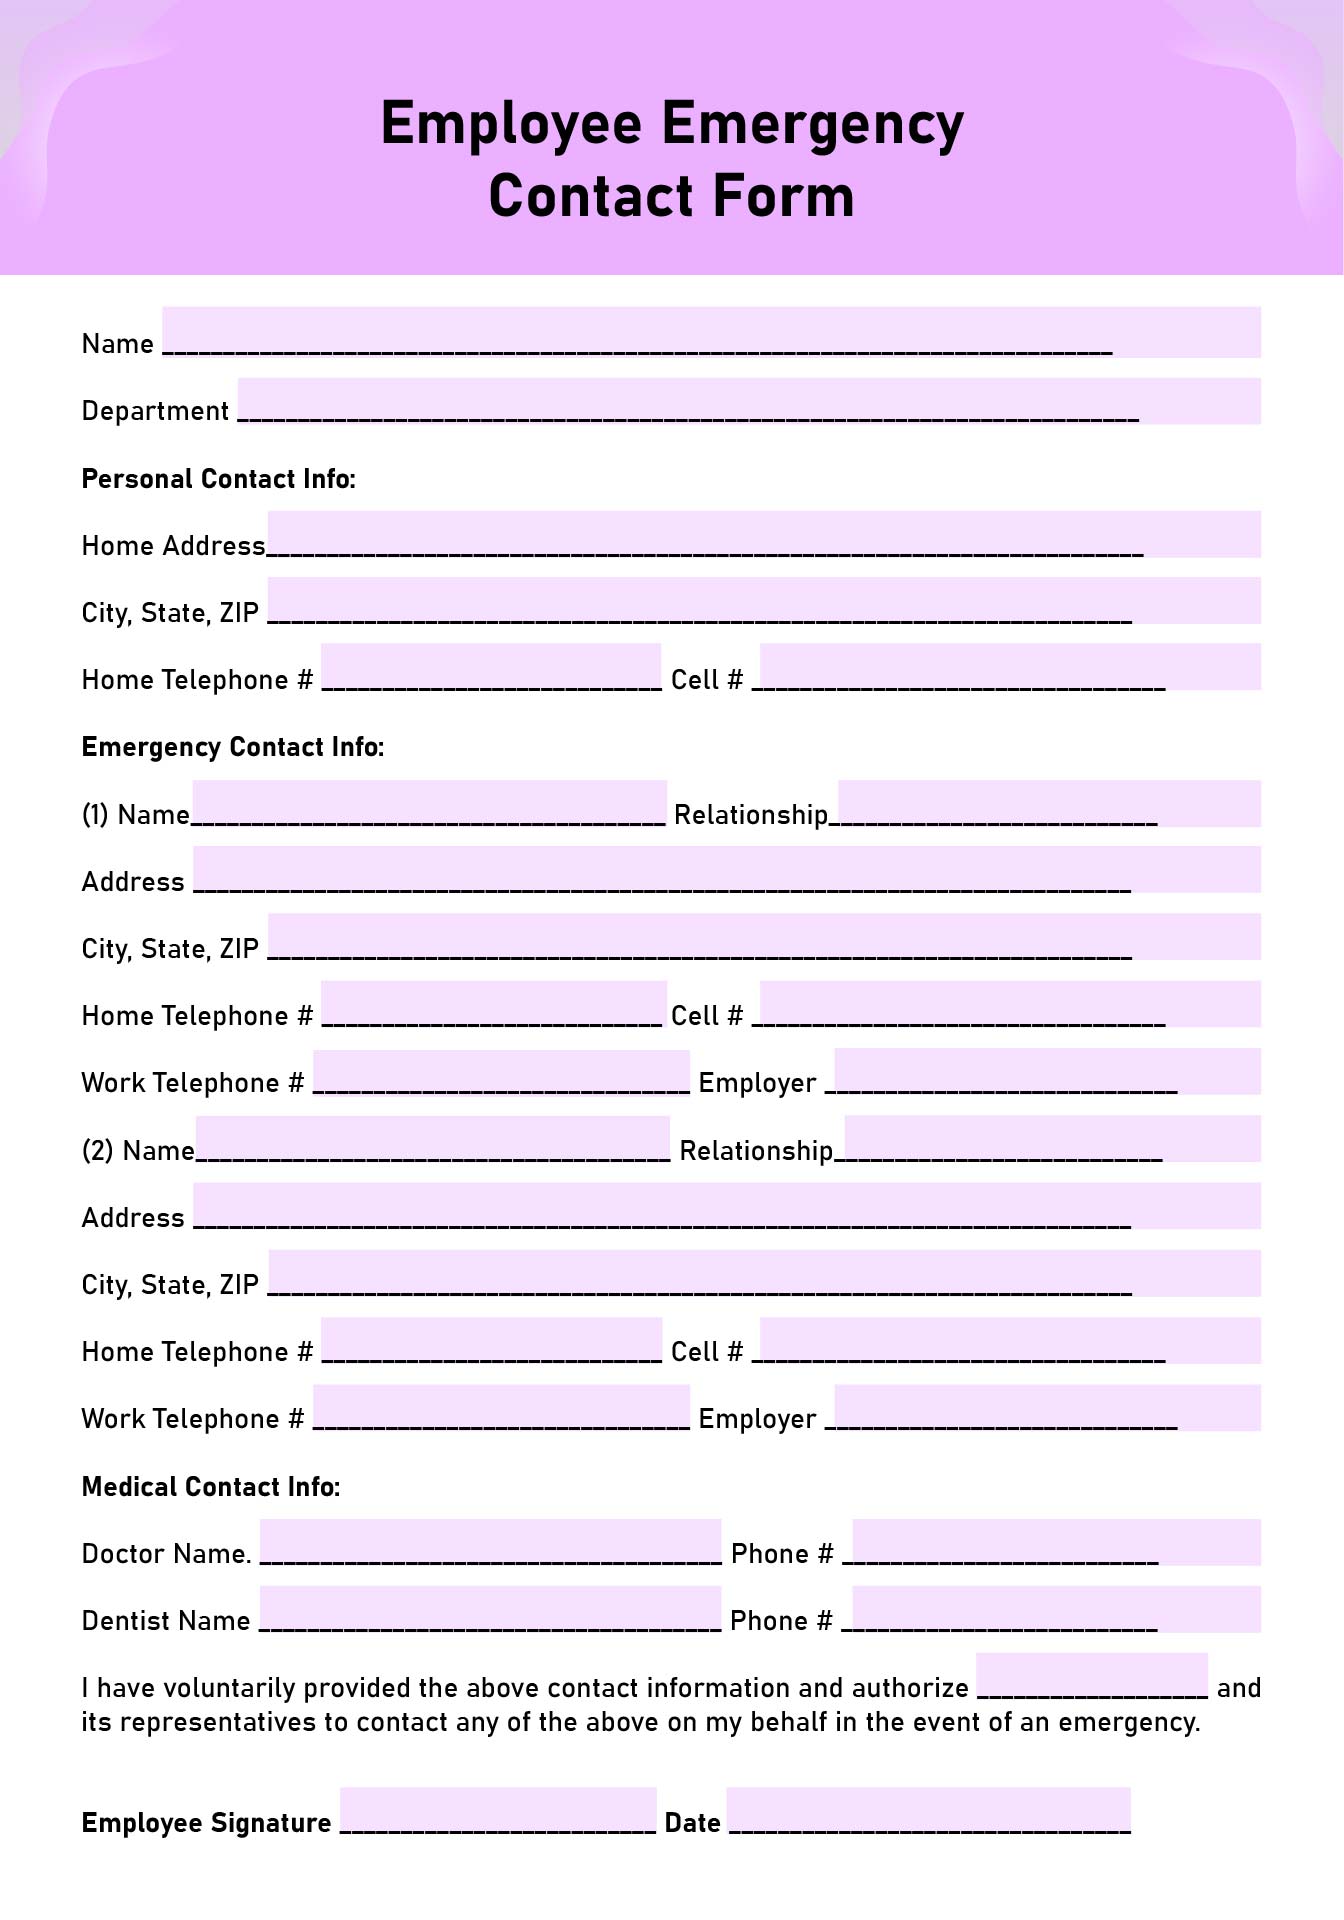 Employee Emergency Contact Form Template Printable